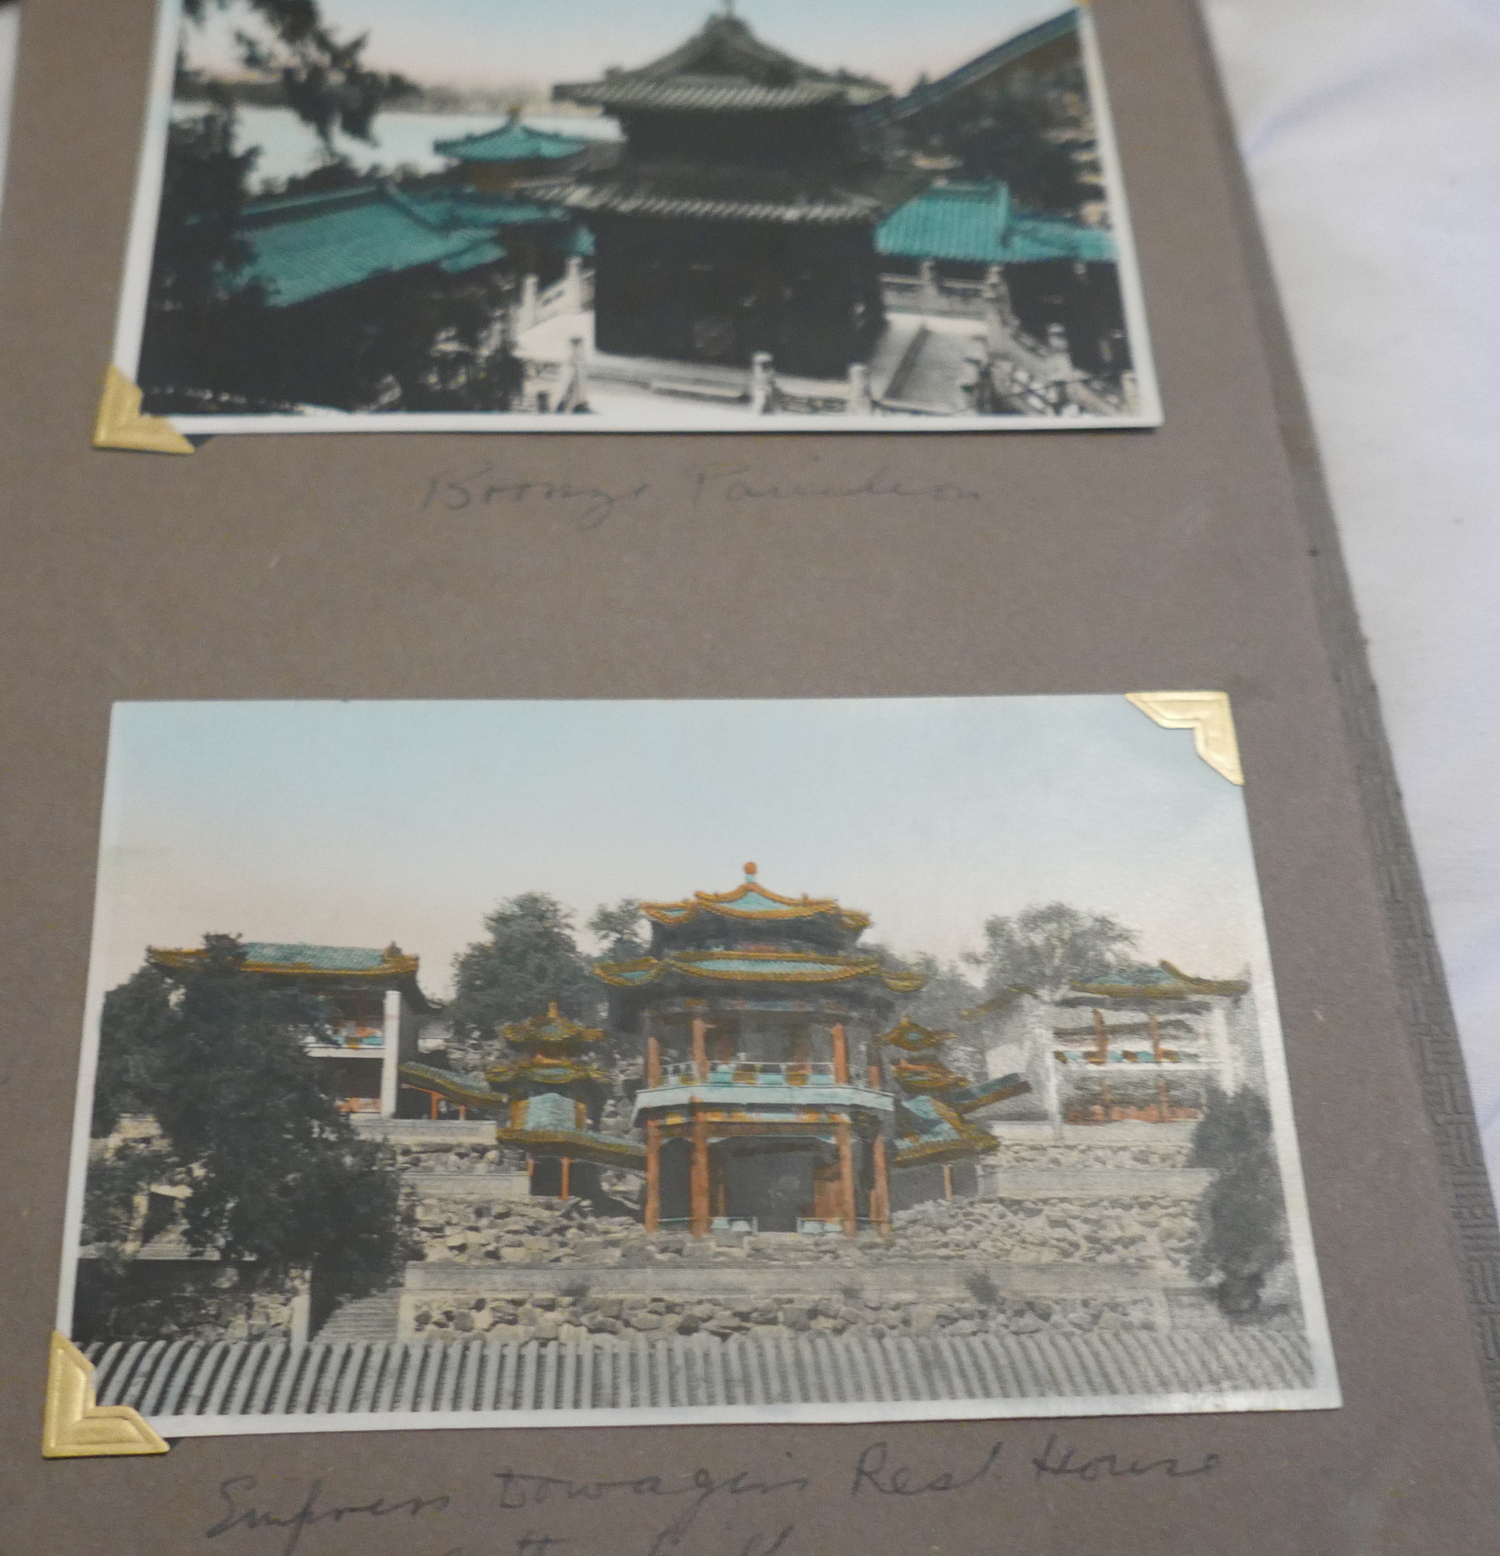 Album of 24 Photographs of the Summer Palace Bejing c1930 by Mei Li Photographer - Image 9 of 13